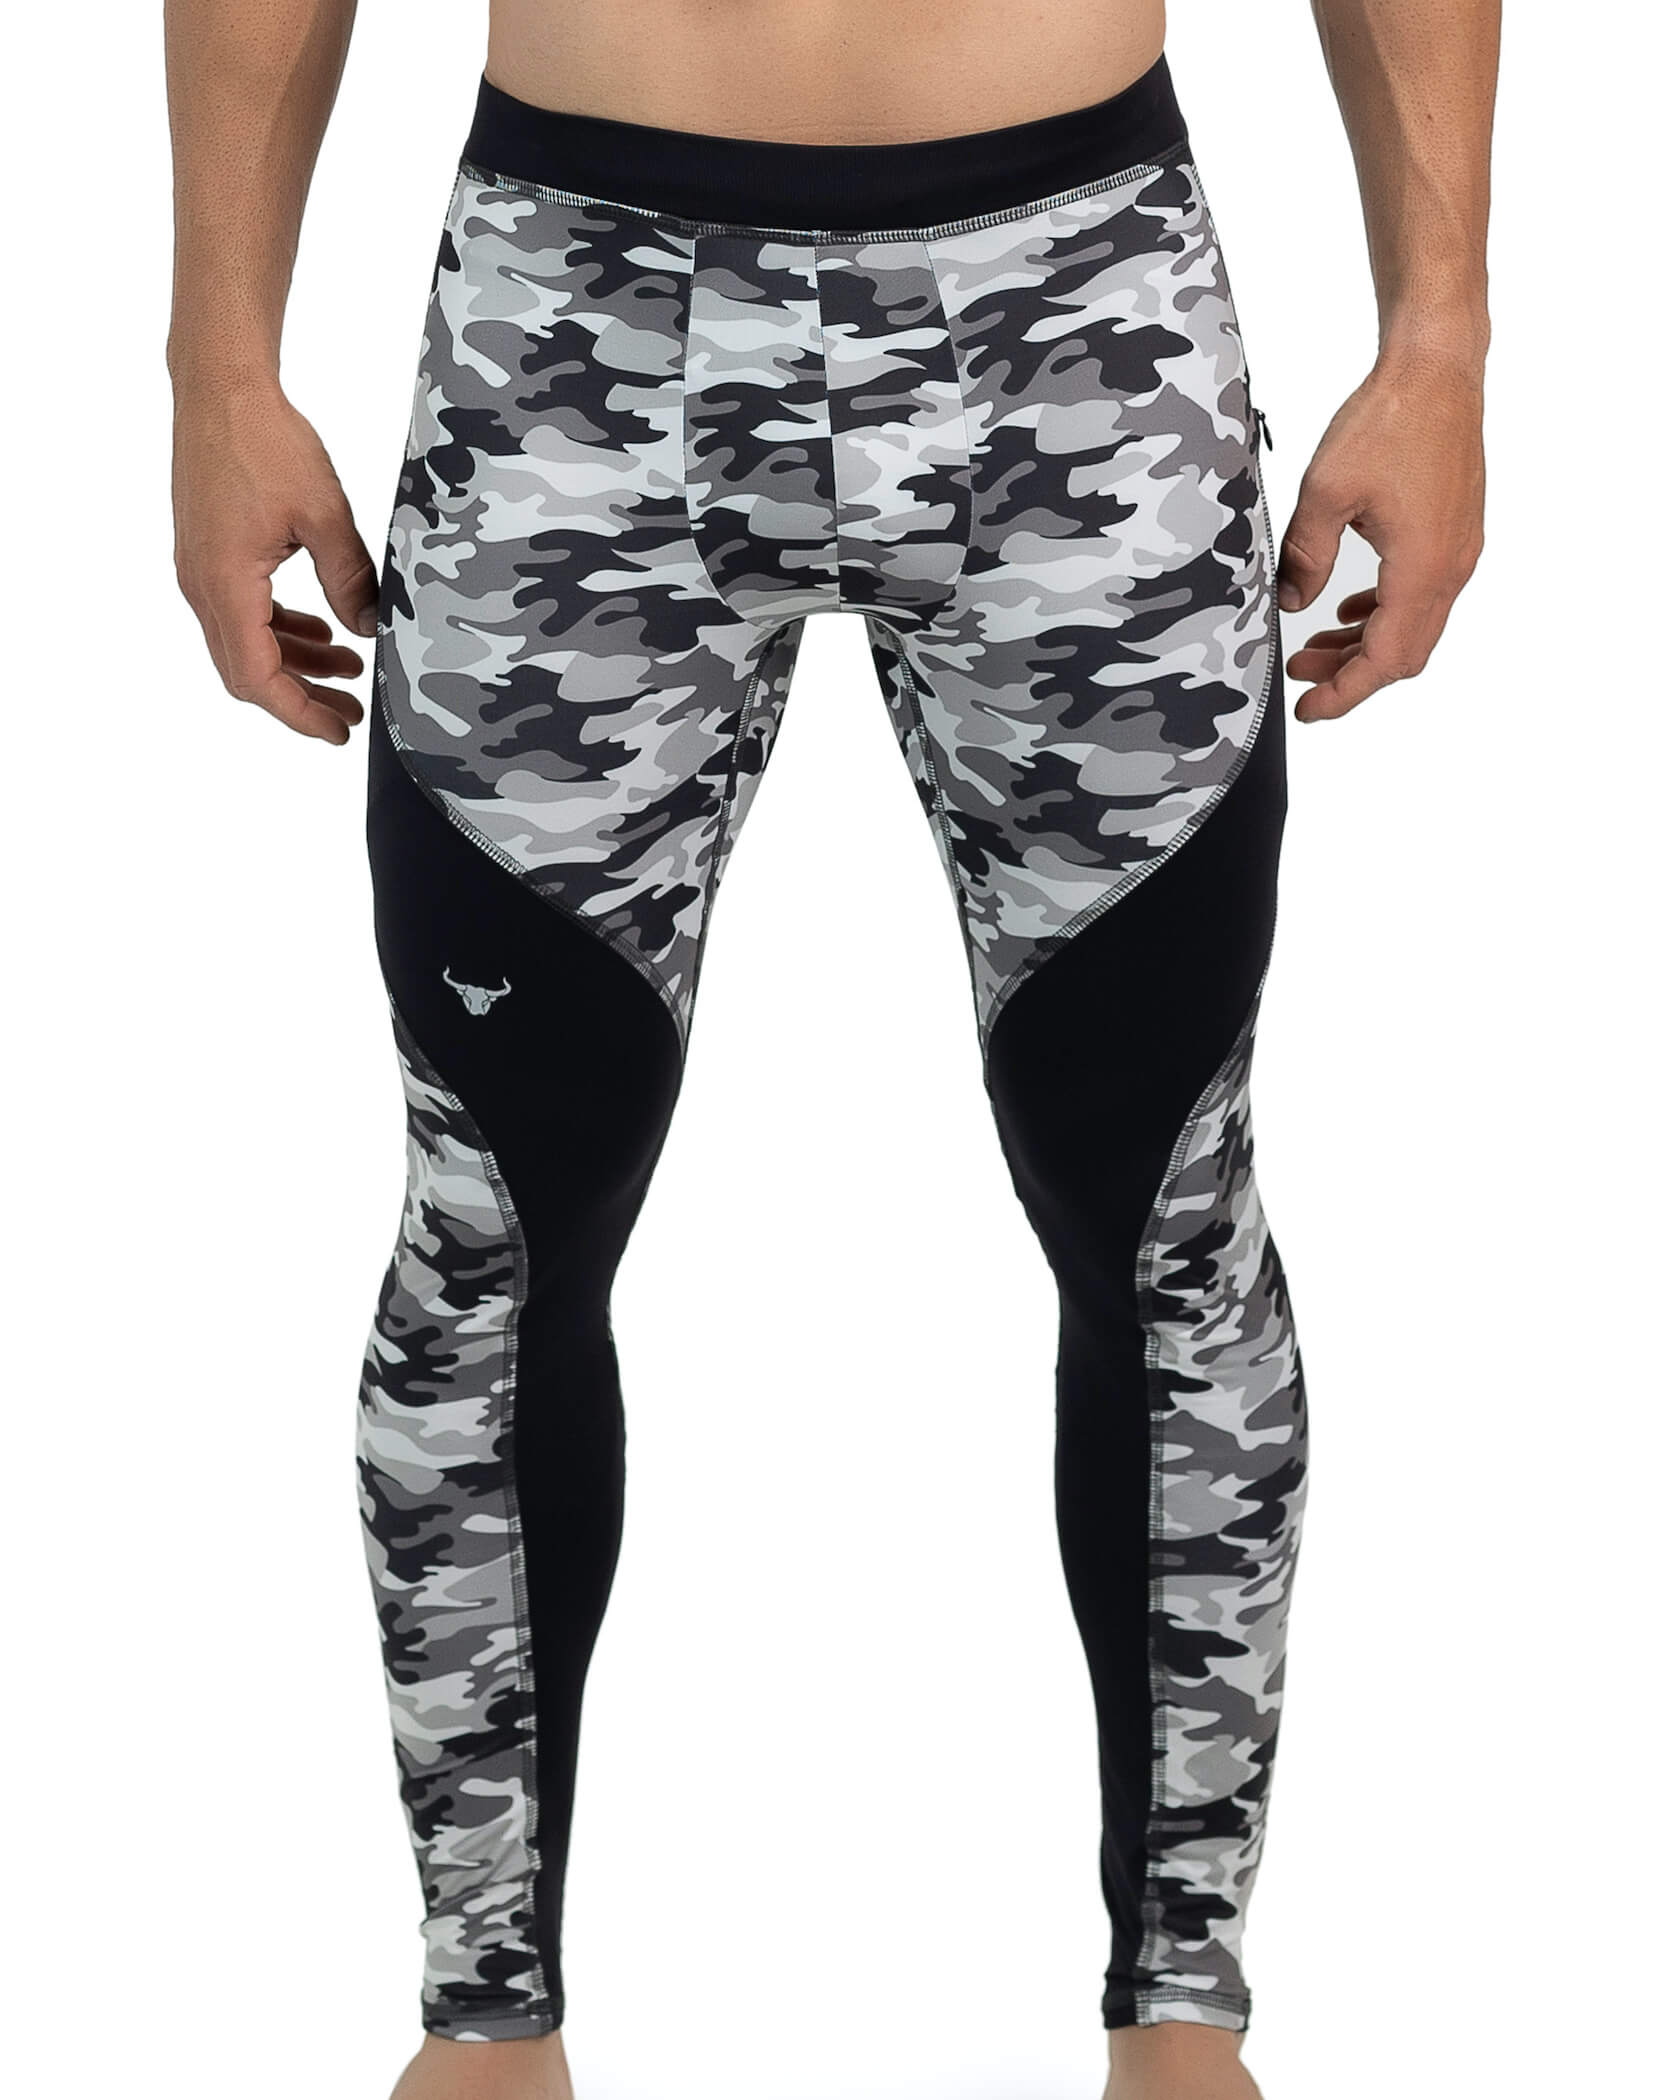 Running Tights for Men Sports Trousers Compression Camouflage Athletic  Pants Workout Leggings